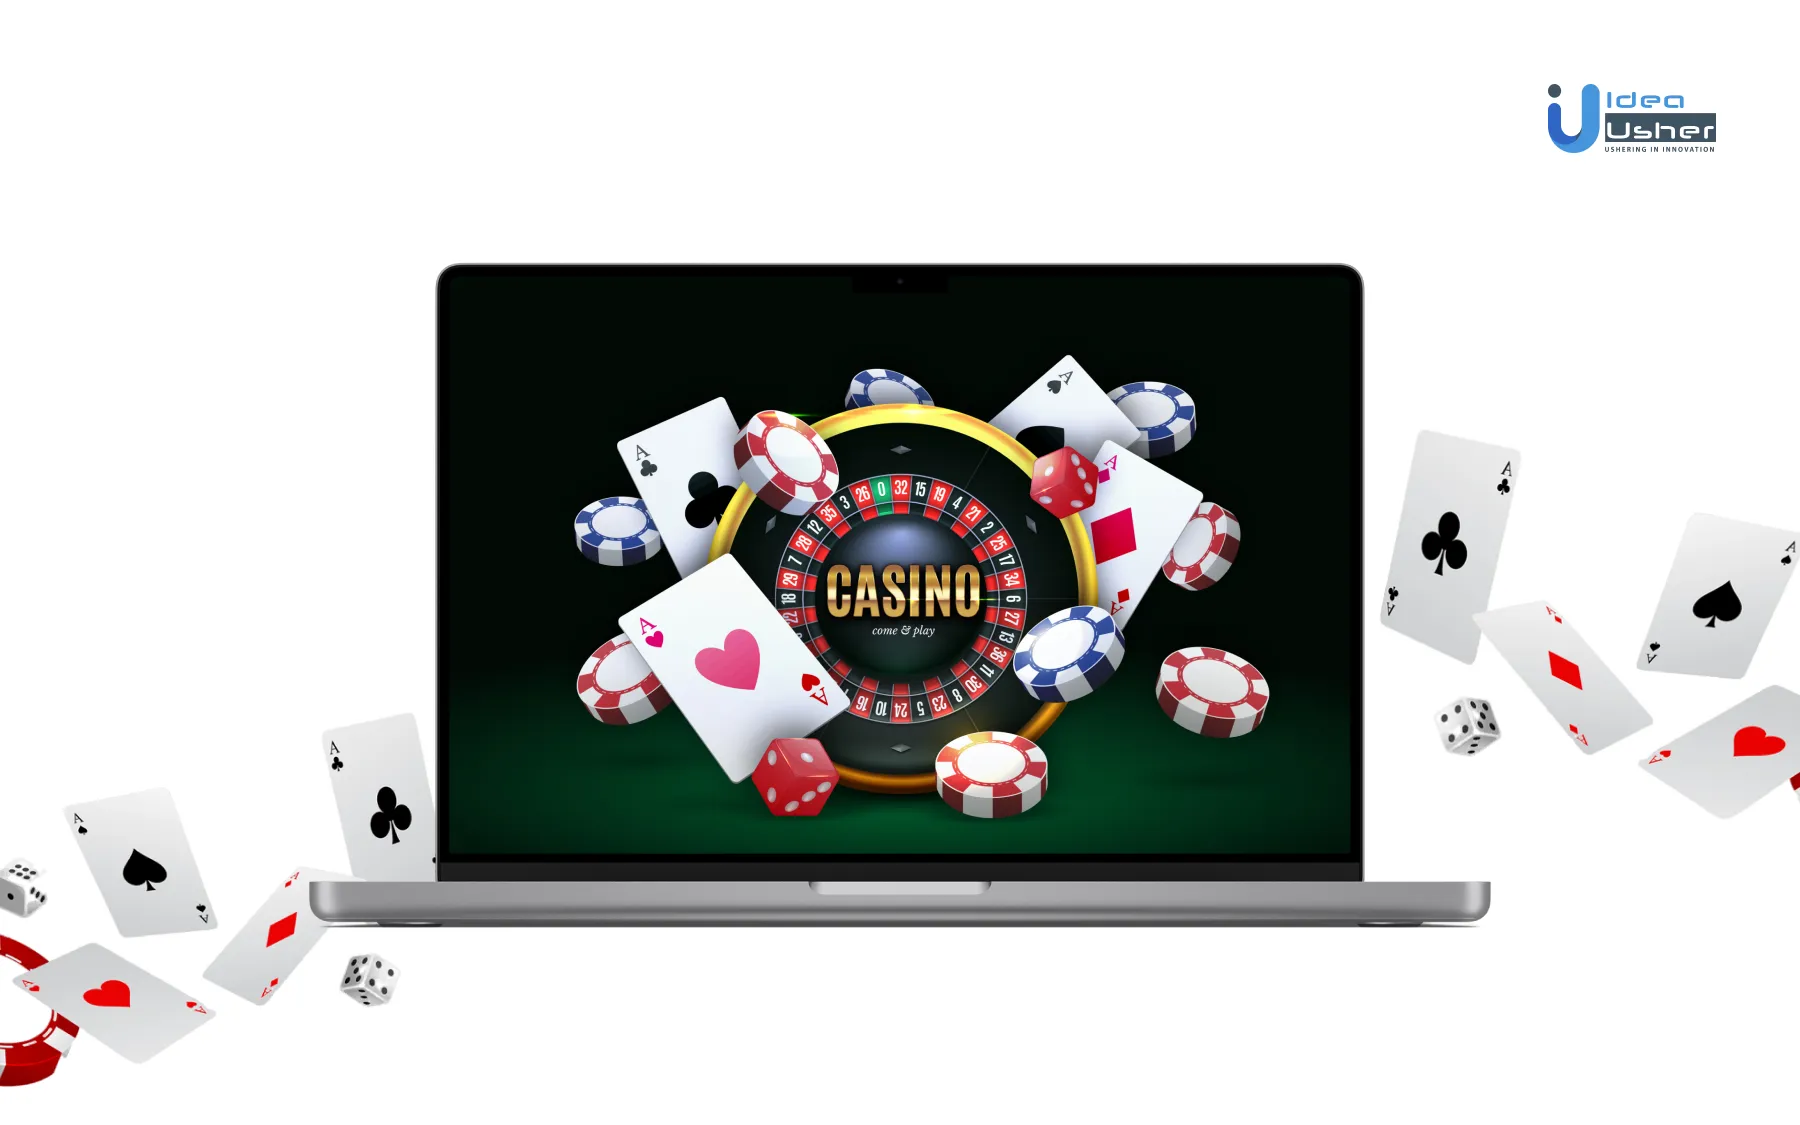 Why casino Is No Friend To Small Business